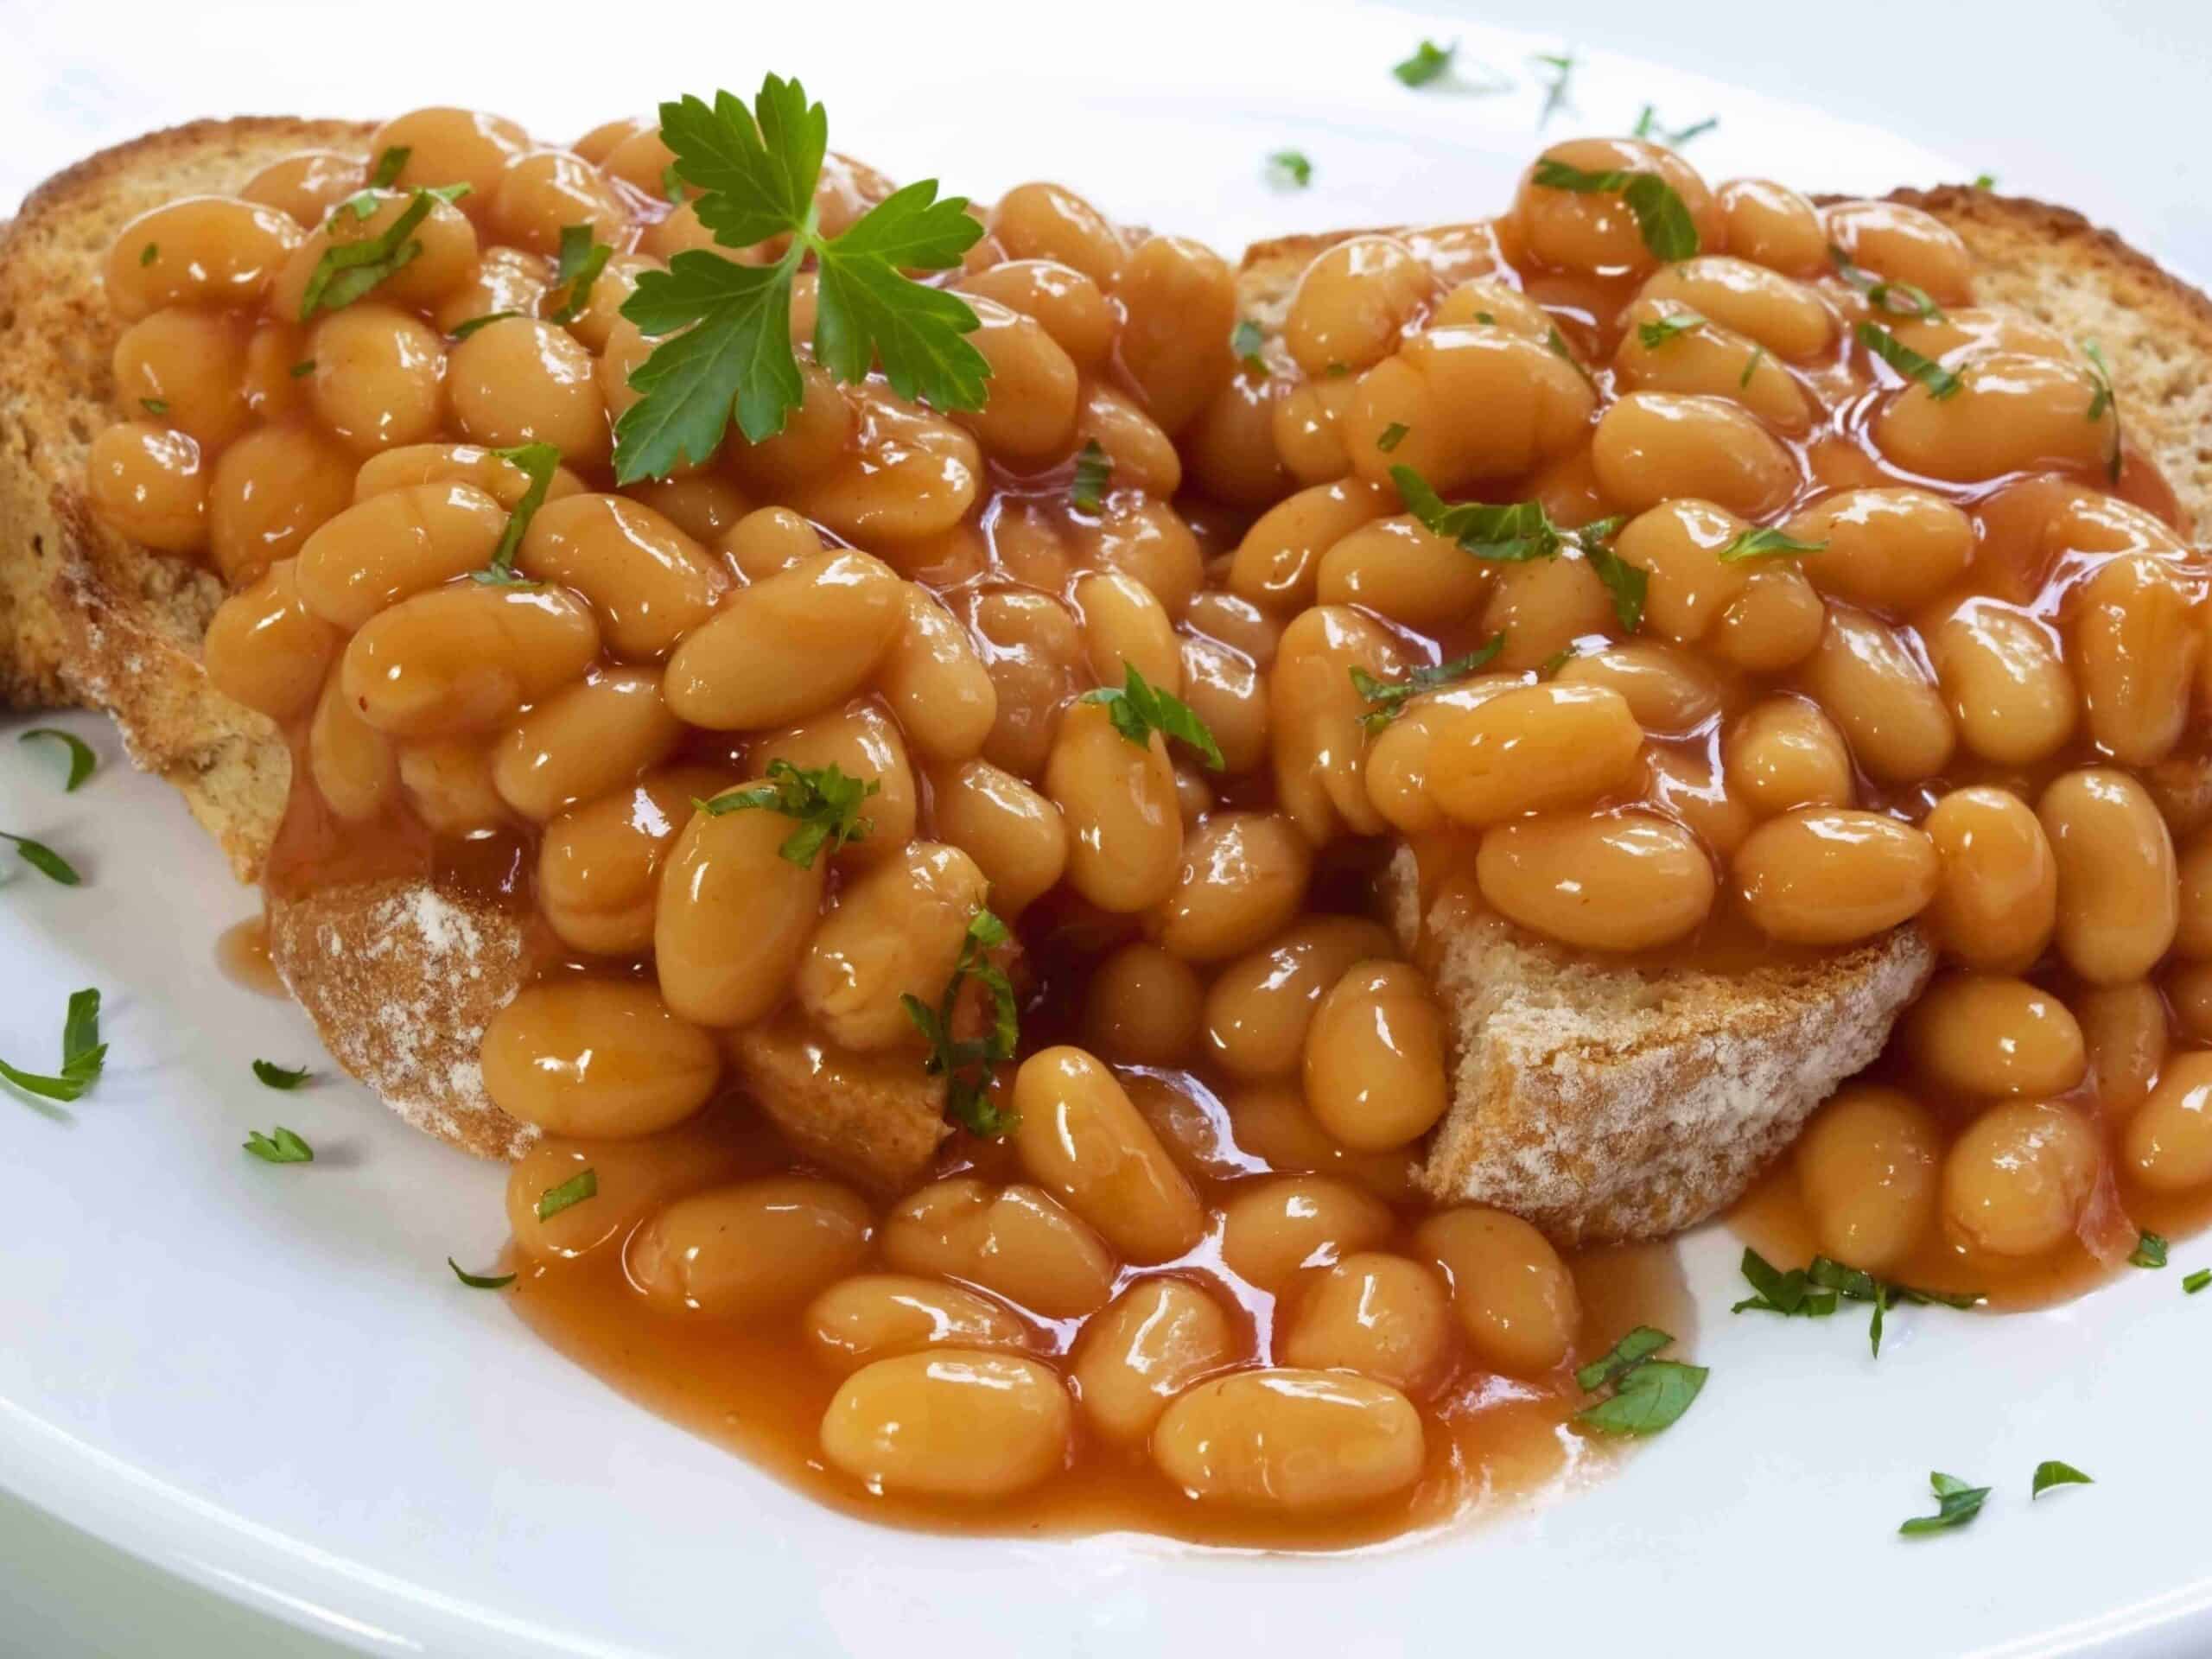 Baked beans on sourdough toast, garnished with parsley.